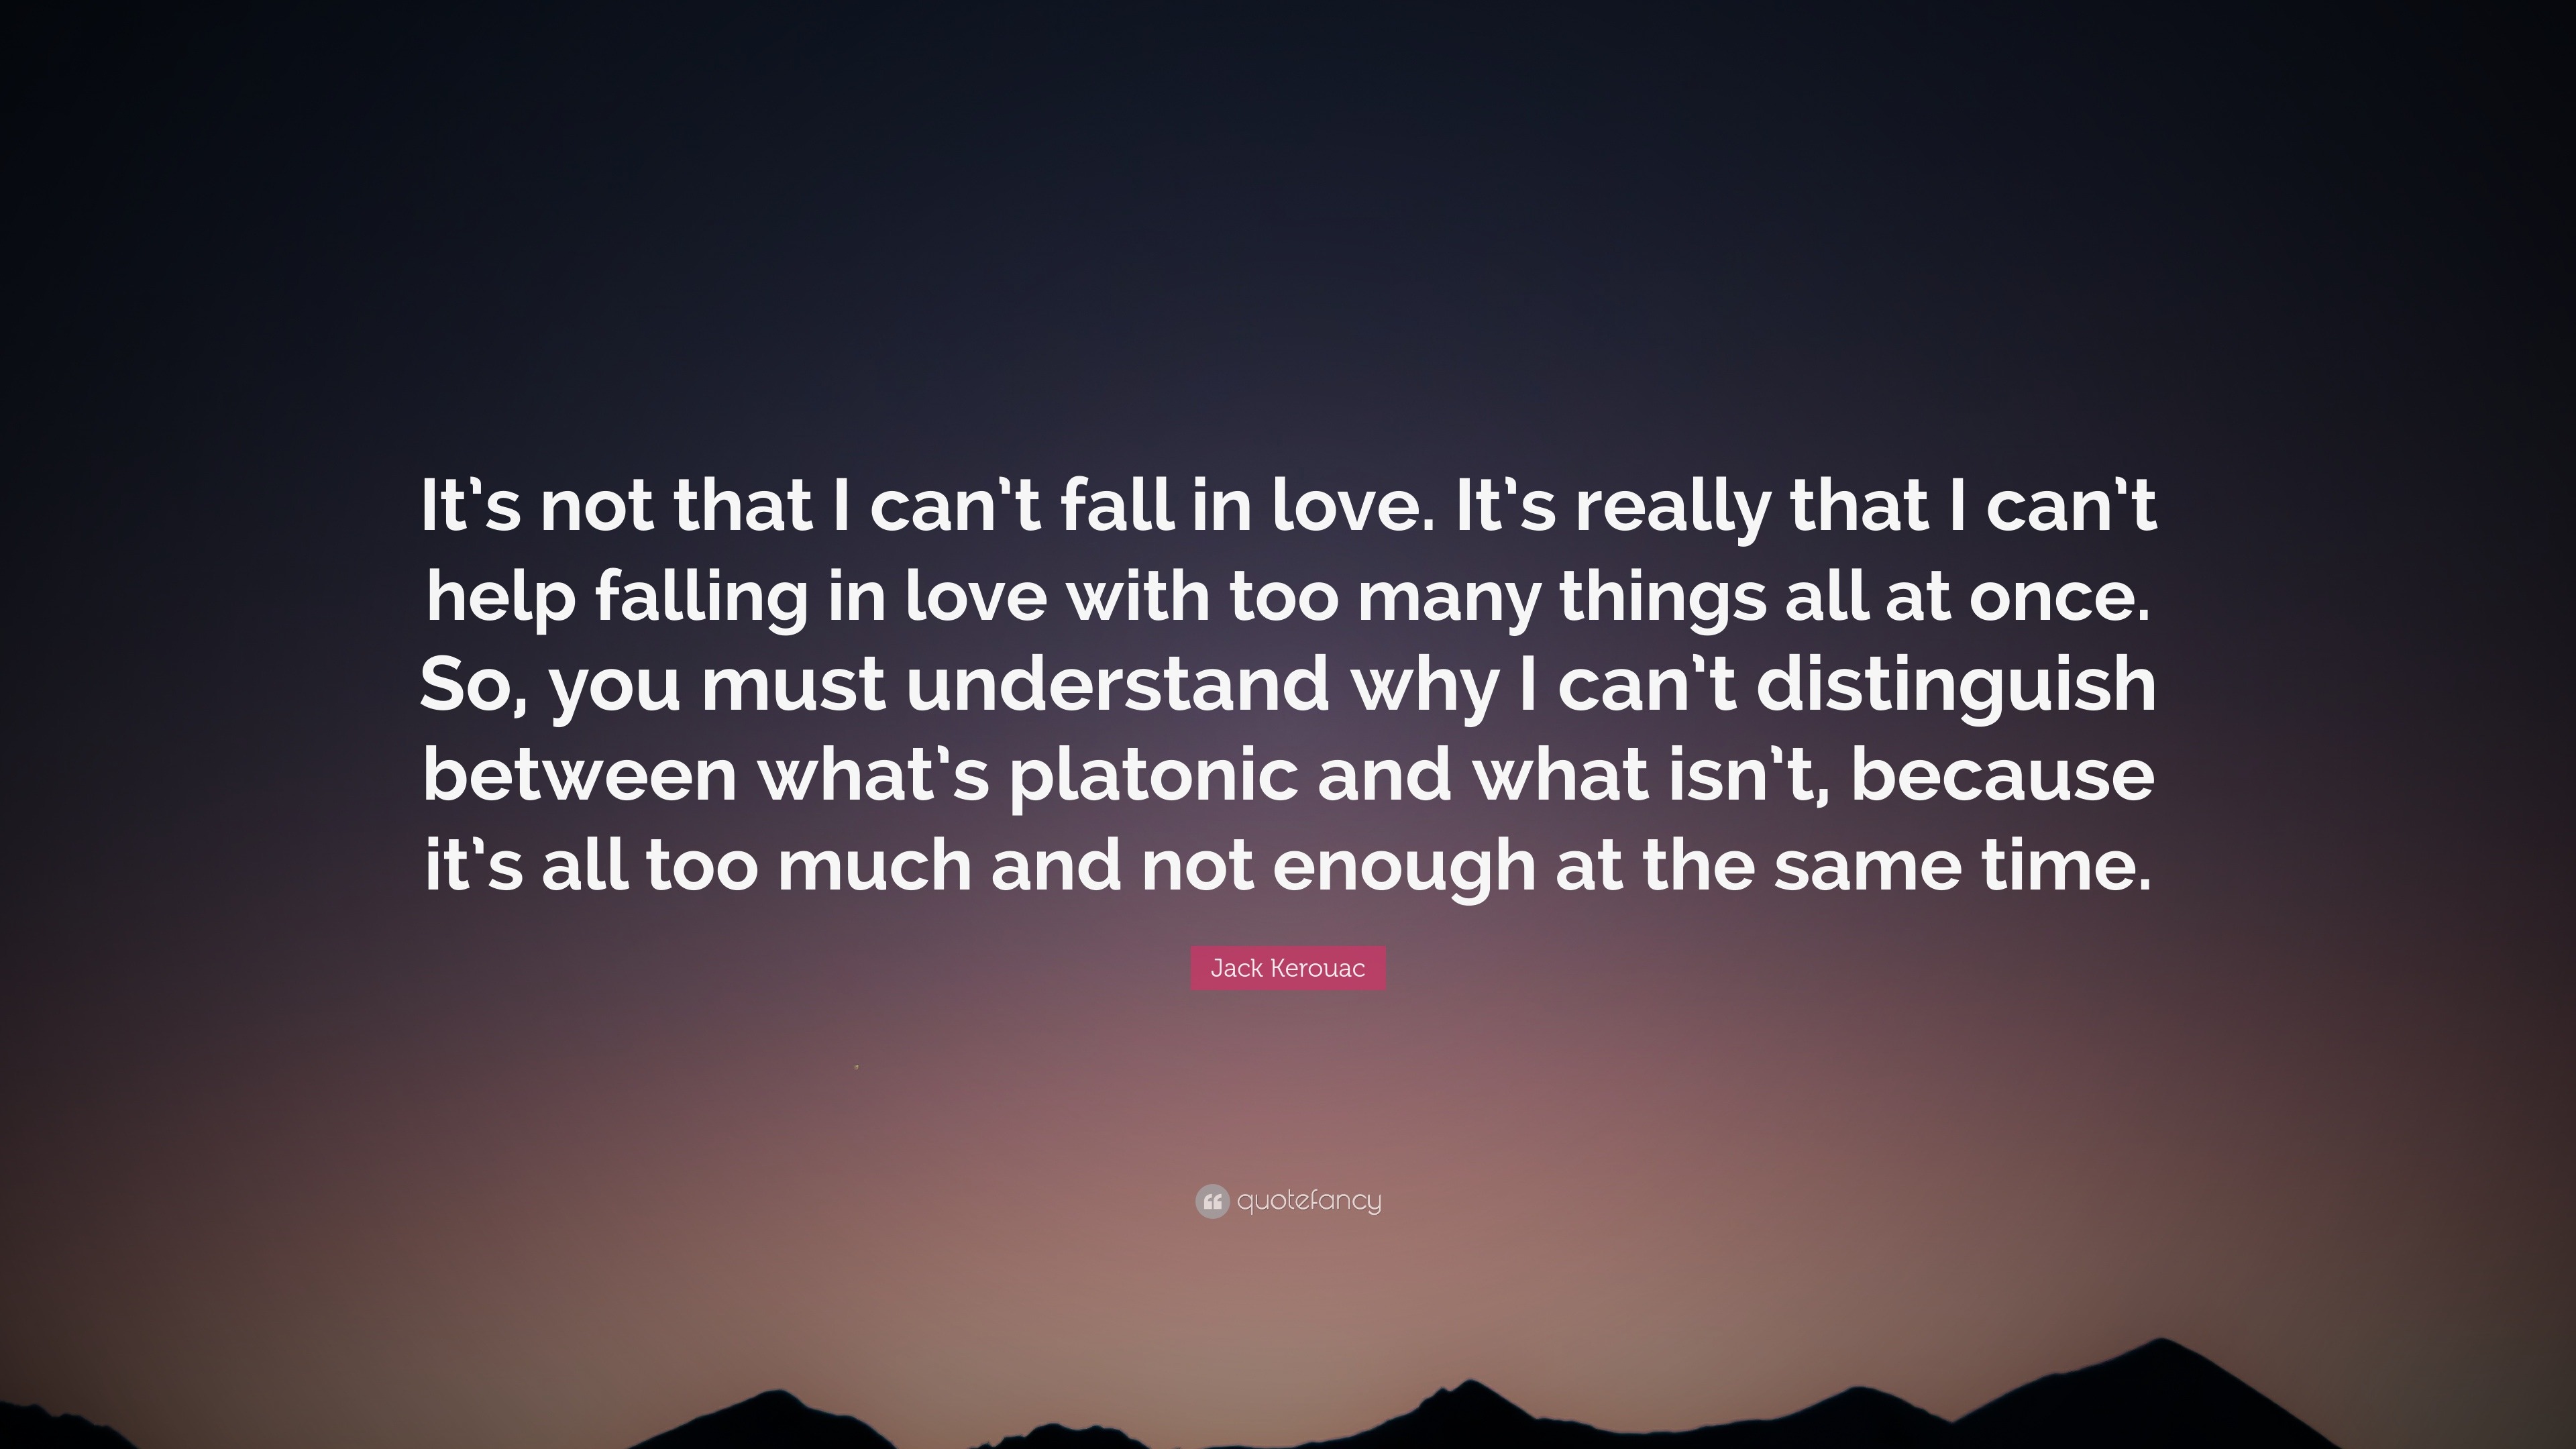 Jack Kerouac Quote “It s not that I can t fall in love